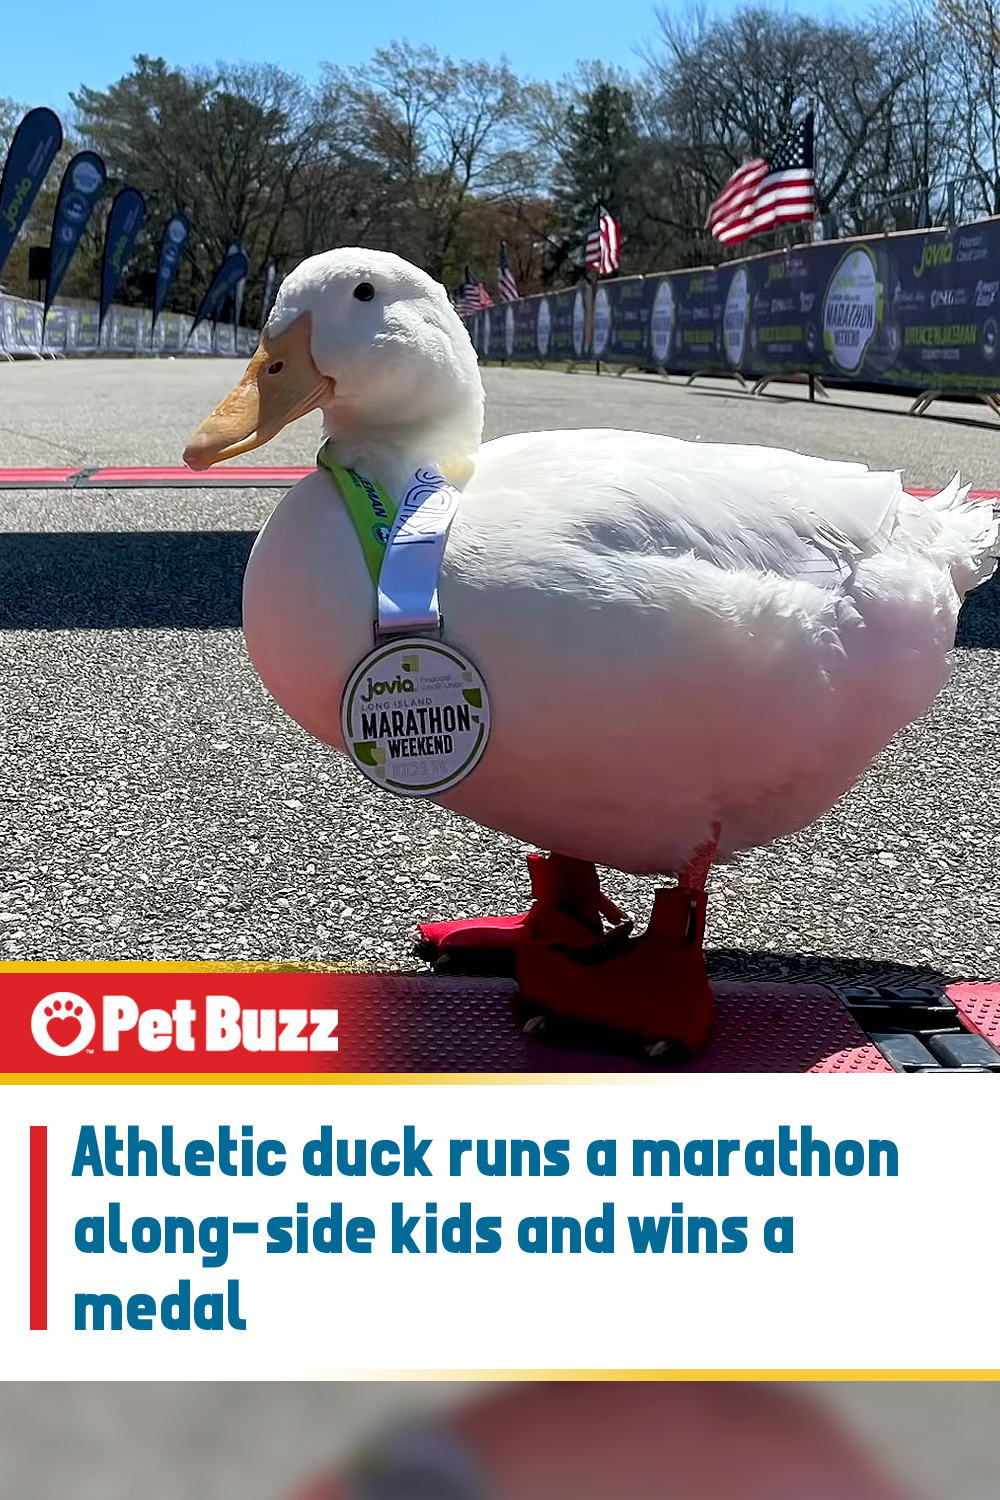 Athletic duck runs a marathon along-side kids and wins a medal